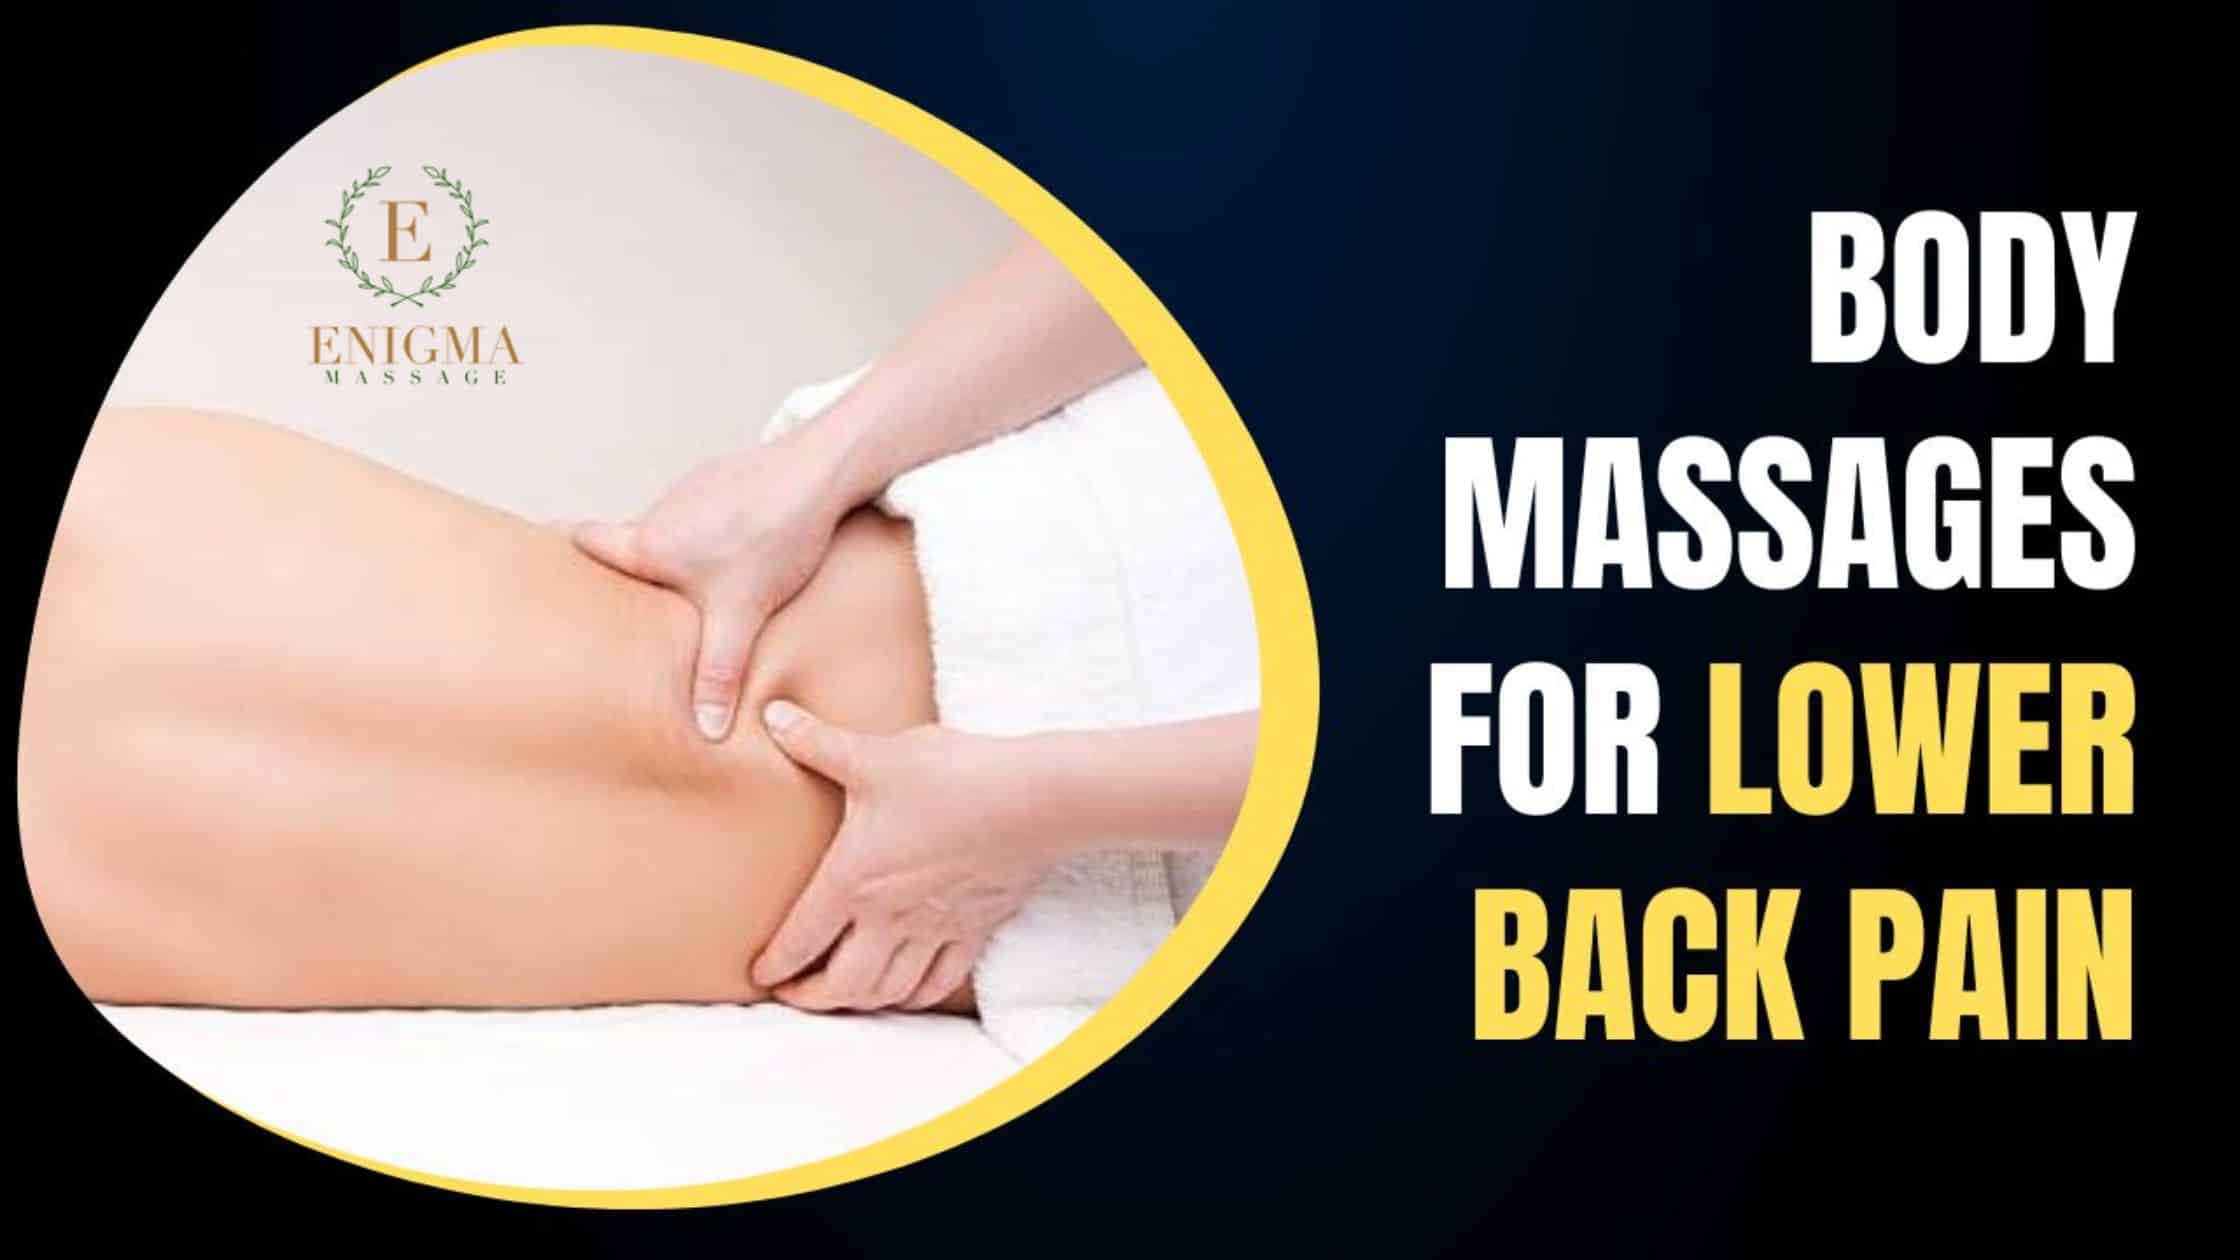 Body Massages for low back pain